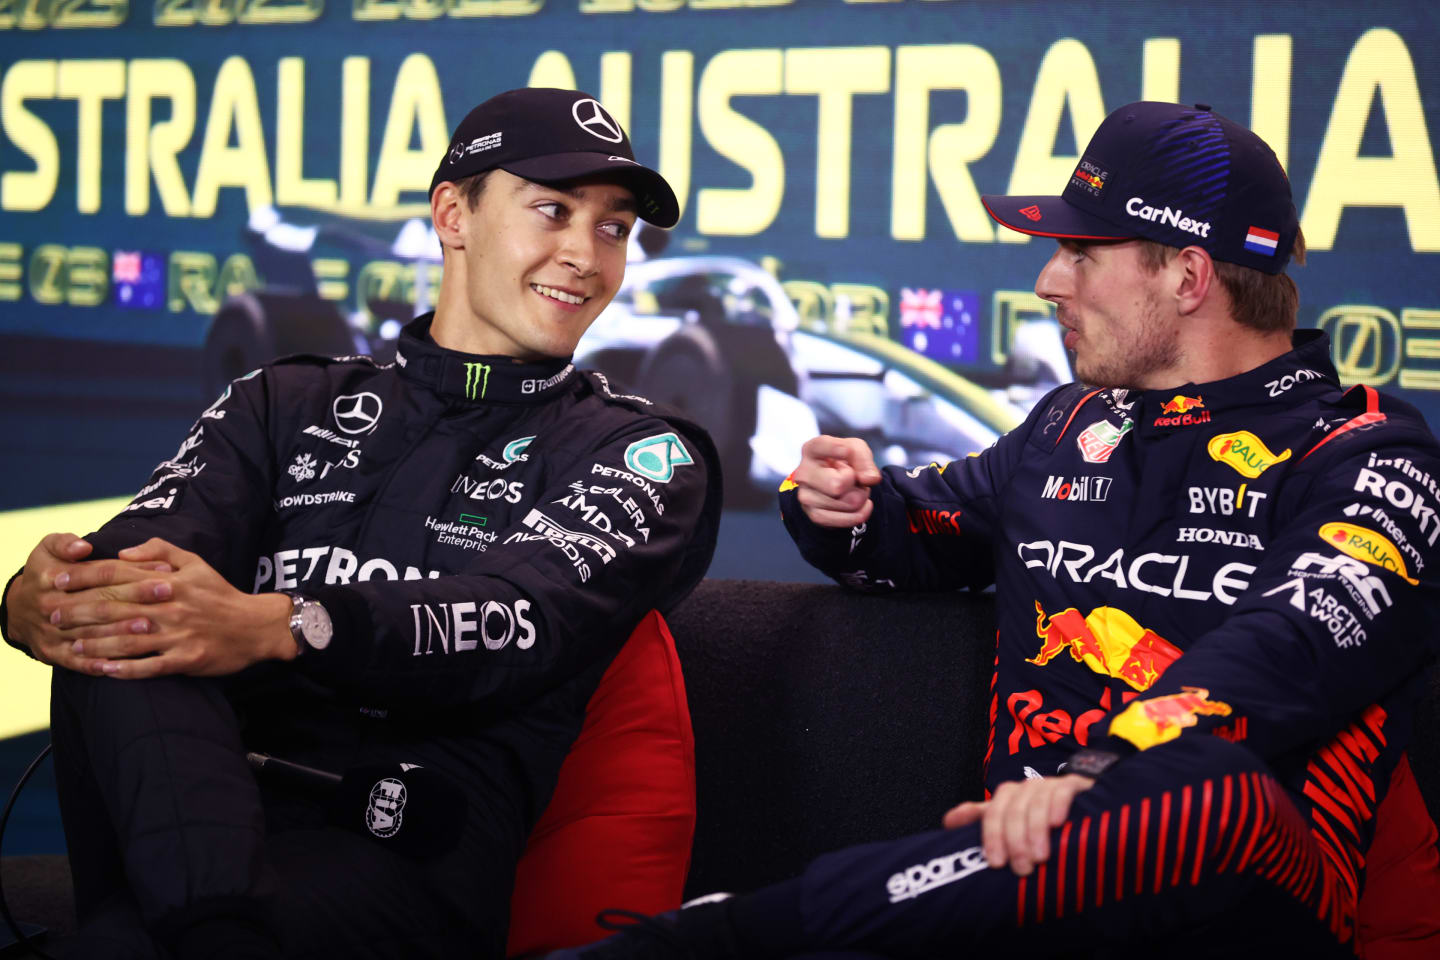 MELBOURNE, AUSTRALIA - APRIL 01: Pole position qualifier Max Verstappen of the Netherlands and Oracle Red Bull Racing (R) and Second placed qualifier George Russell of Great Britain and Mercedes (L) attend the press conference after qualifying ahead of the F1 Grand Prix of Australia at Albert Park Grand Prix Circuit on April 01, 2023 in Melbourne, Australia. (Photo by Robert Cianflone/Getty Images)